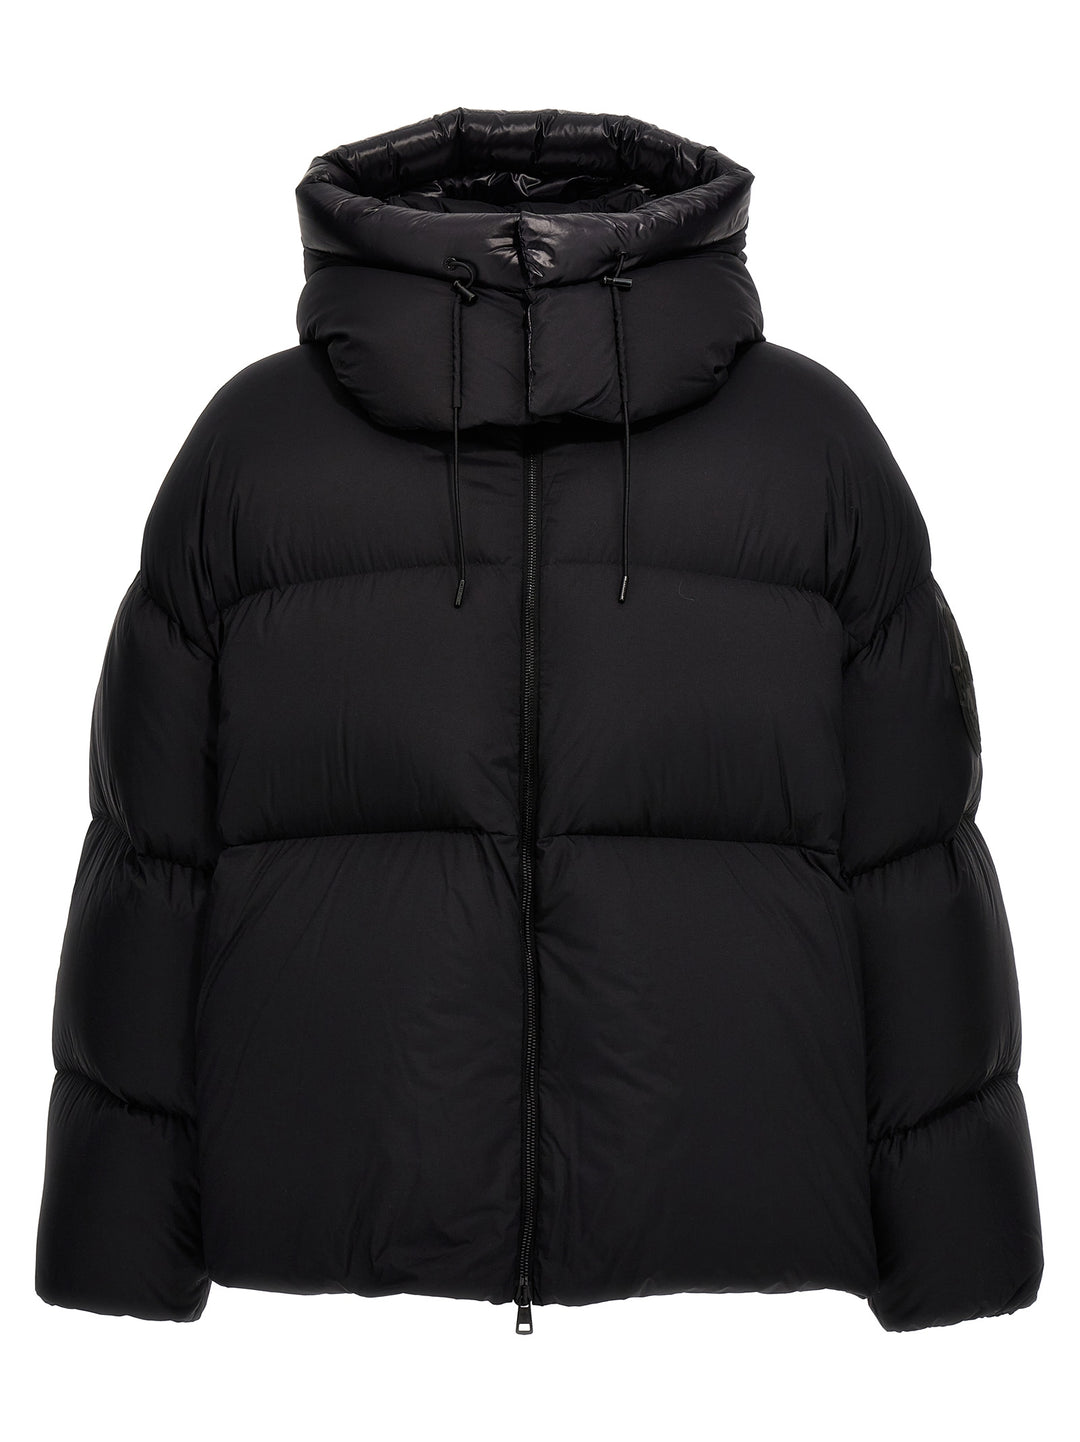 Moncler Genius Roc Nation By Jay-Z Down Jacket Giacche Nero